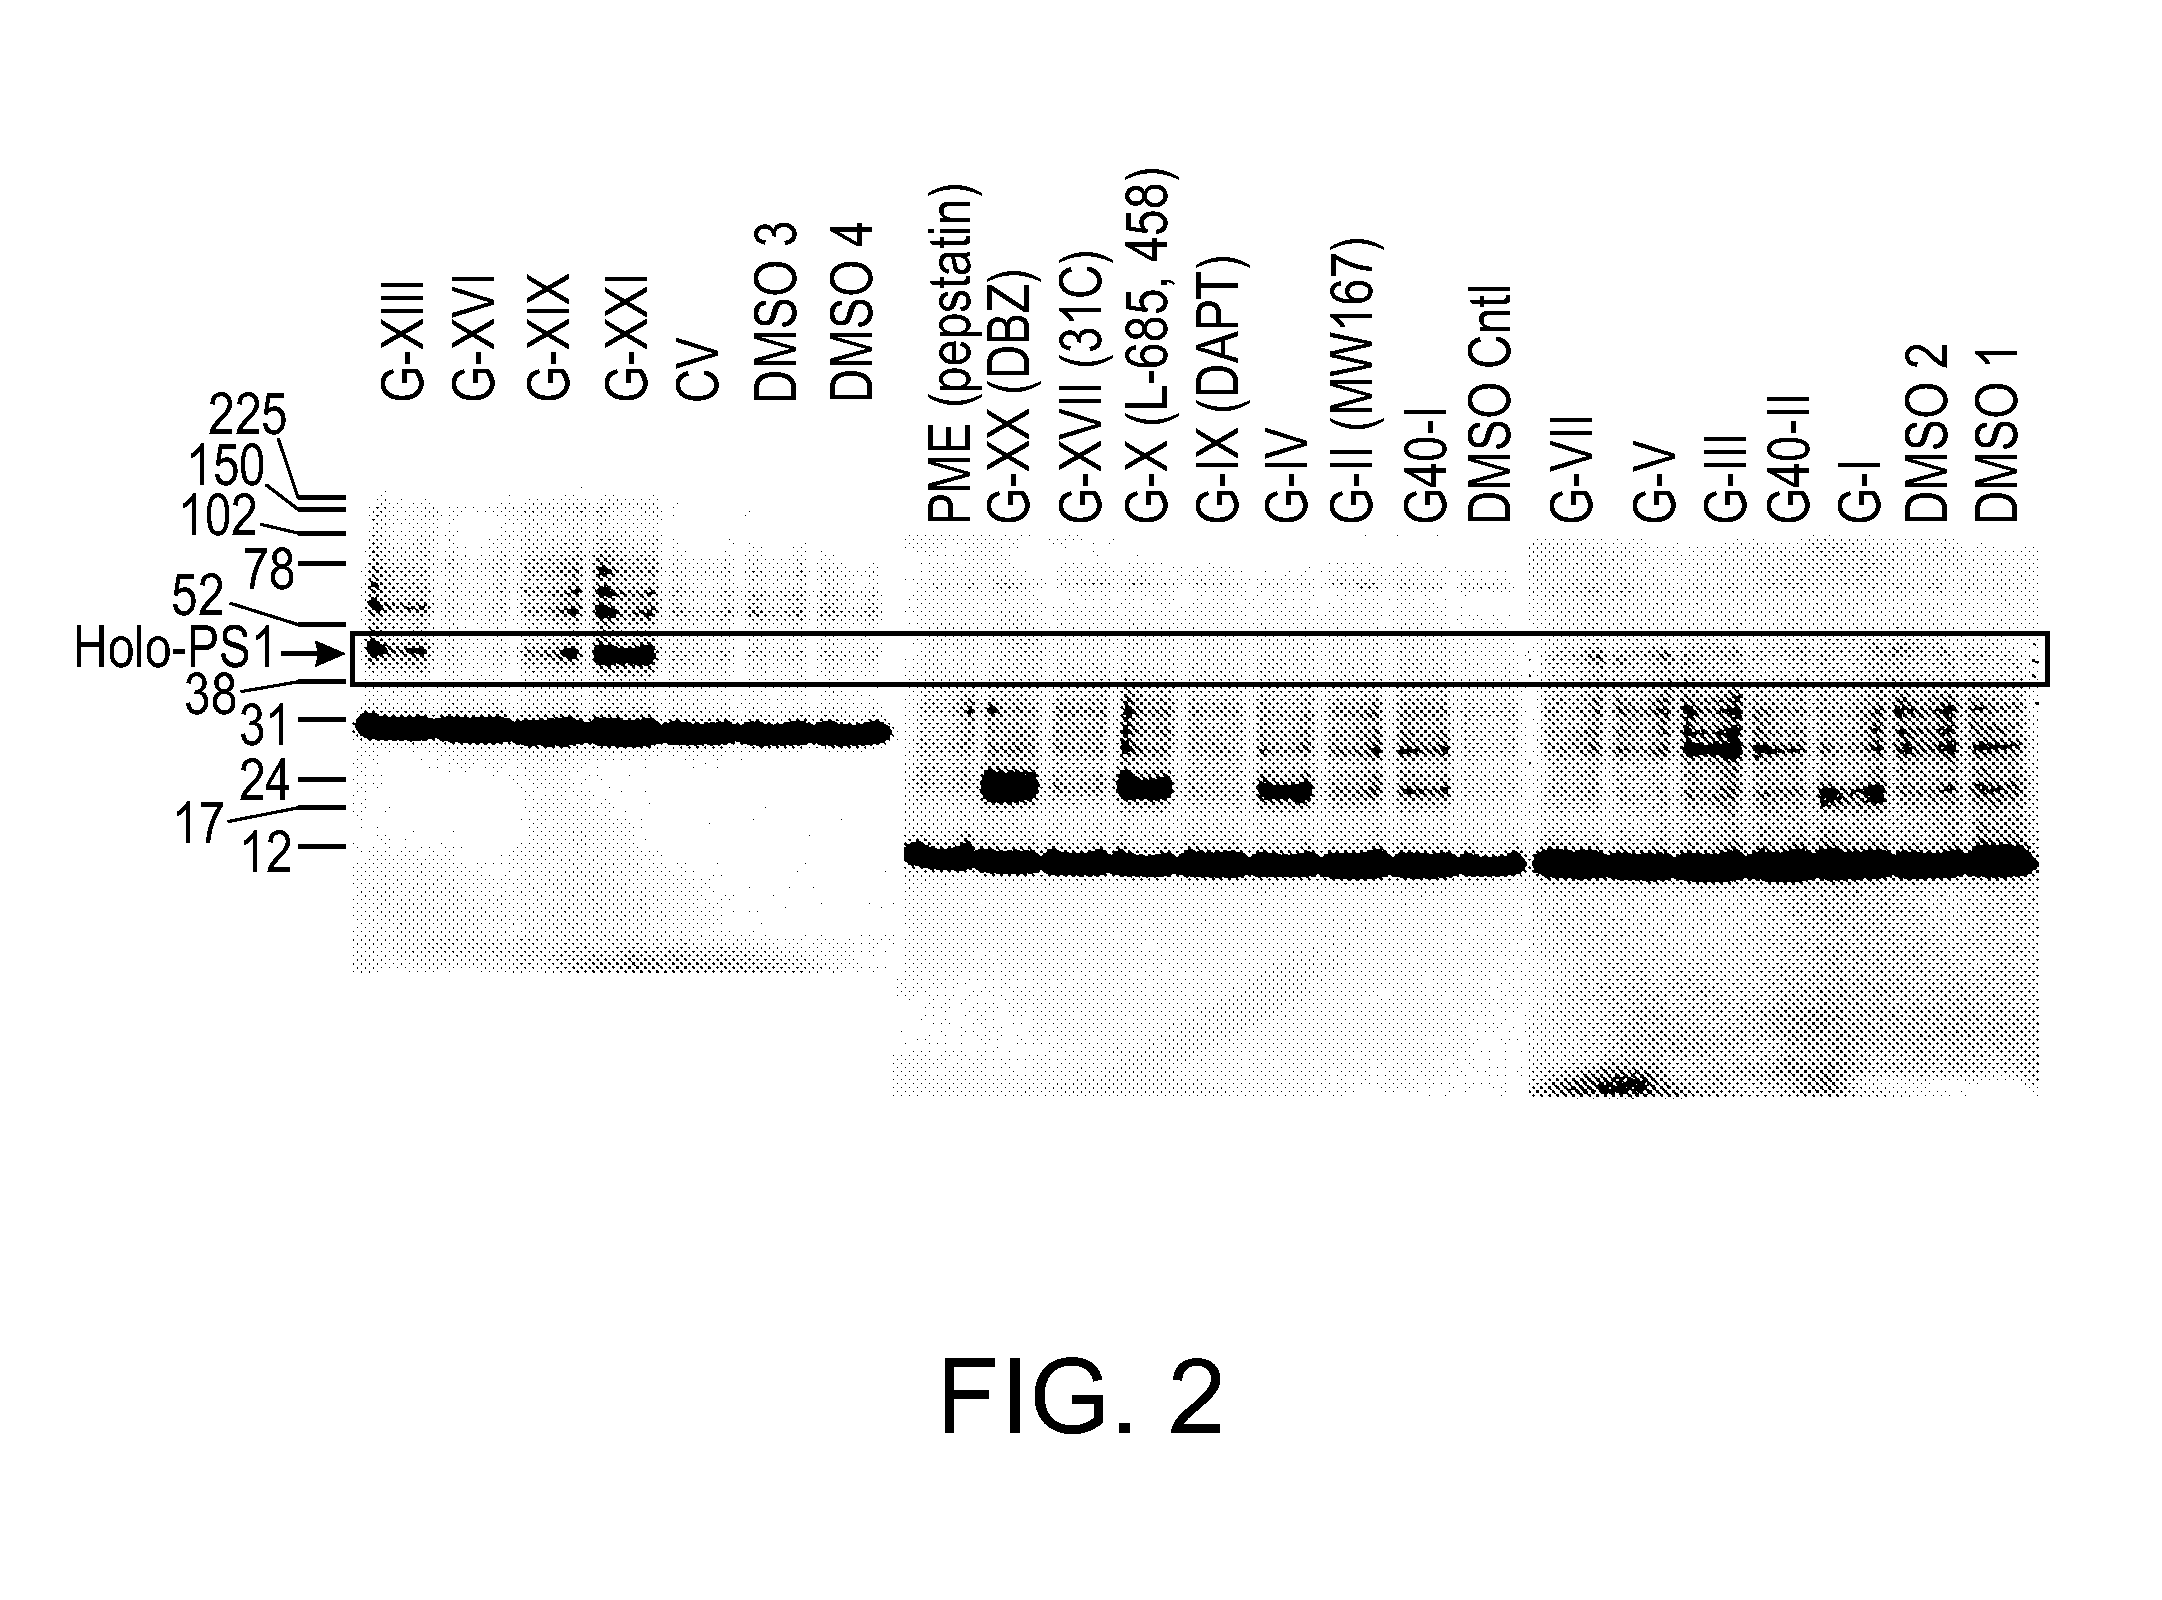 Method of treating alzheimer's disease using pharmacological chaperones to increase presenilin function and gamma-secretase activity